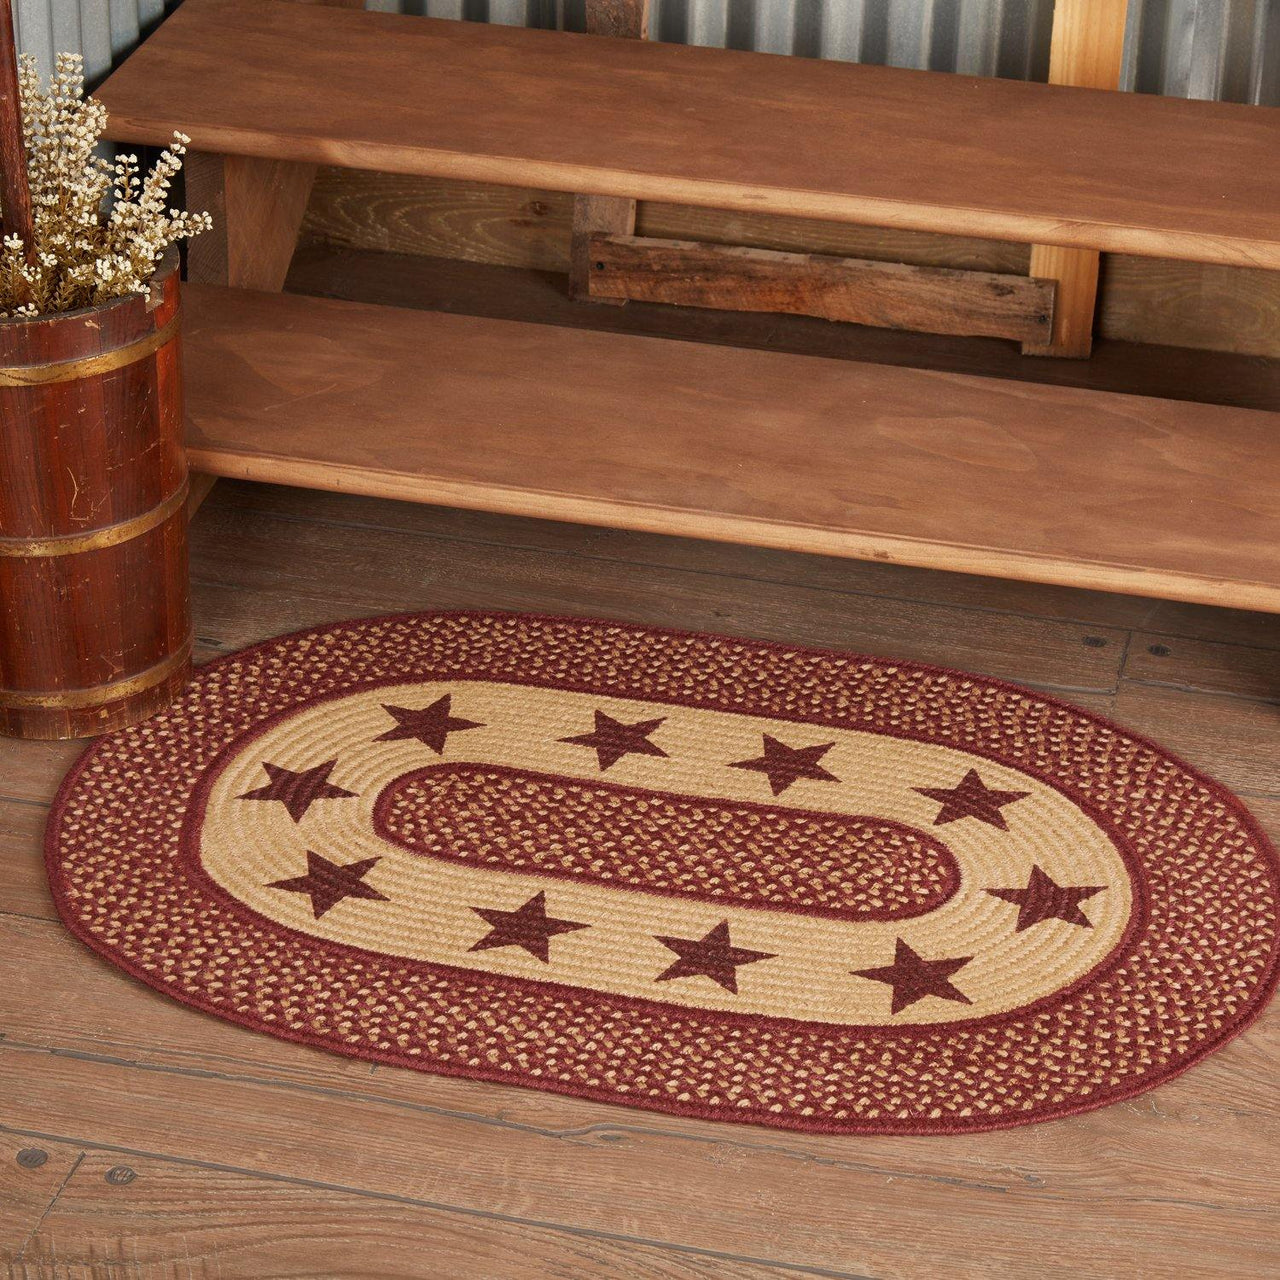 Burgundy Red Primitive Jute Braided Rug Oval Stencil Stars 24"x36" with Rug Pad VHC Brands - The Fox Decor